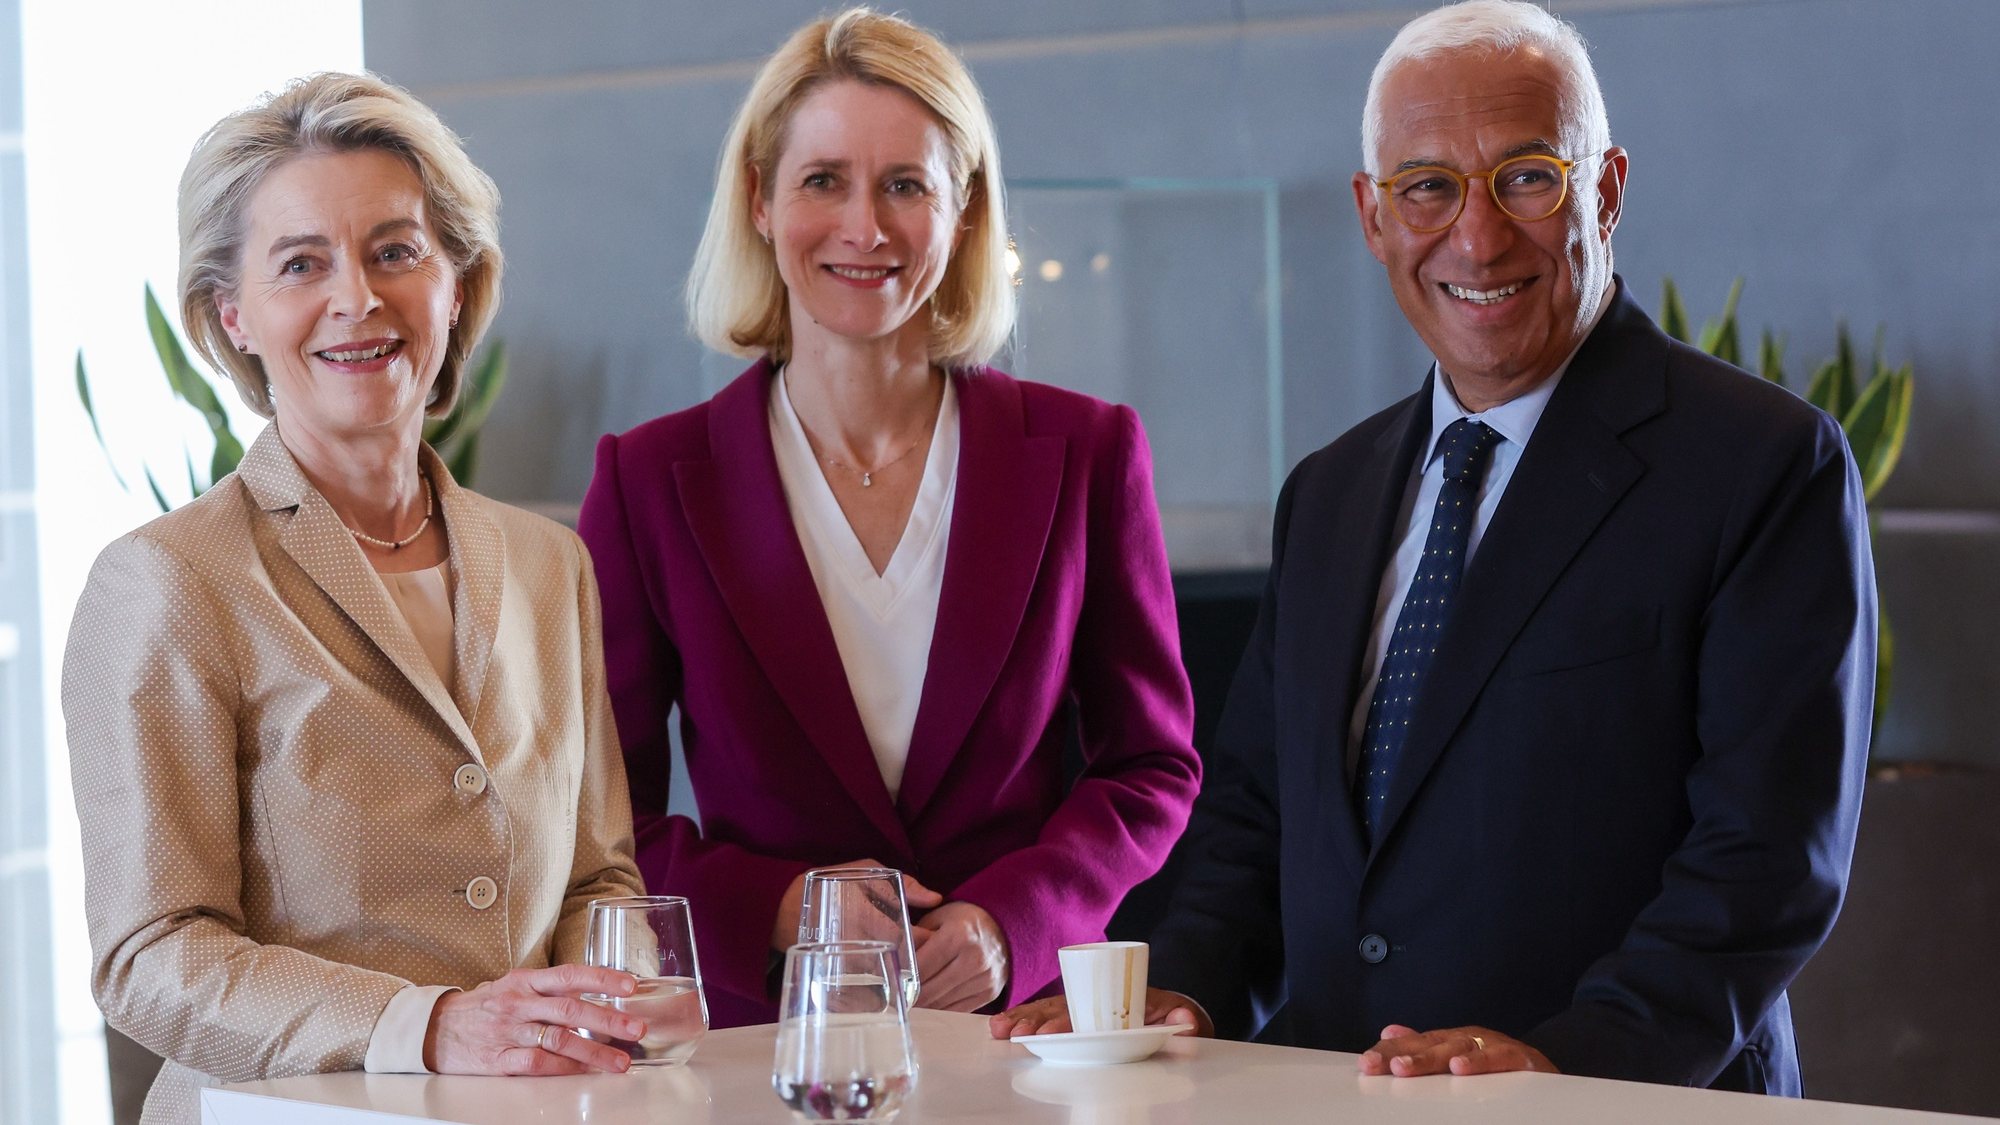 epa11443269 (L-R) European Commission President Ursula Von der Leyen, Estonian Prime Minister Kaja Kallas, and former Portuguese Prime Minister Antonio Costa, during a meeting  at Brussels Airport, a day after the EU summit in Brussels, Belgium, 28 June 2024. EU leaders agreed on proposing Ursula Von der Leyen as candidate for President of the European Commission and Kaja Kallas as High Representative of the Union for Foreign Affairs and Security Policy, while Antonio Costa was elected as European Council President during a summit to discuss the Strategic Agenda 2024-2029, the next institutional cycle, Ukraine, the Middle East, competitiveness, security and defense, among other topics.  EPA/OLIVIER HOSLET / POOL